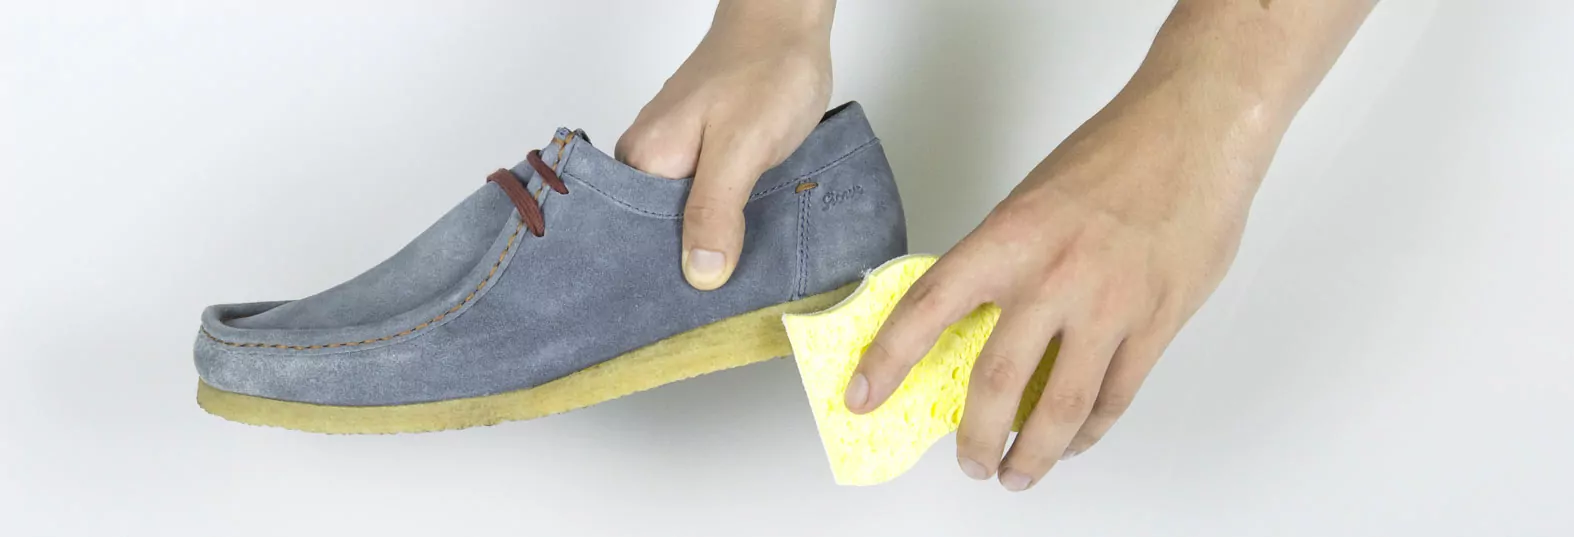 How To Clean A Crepe Sole  